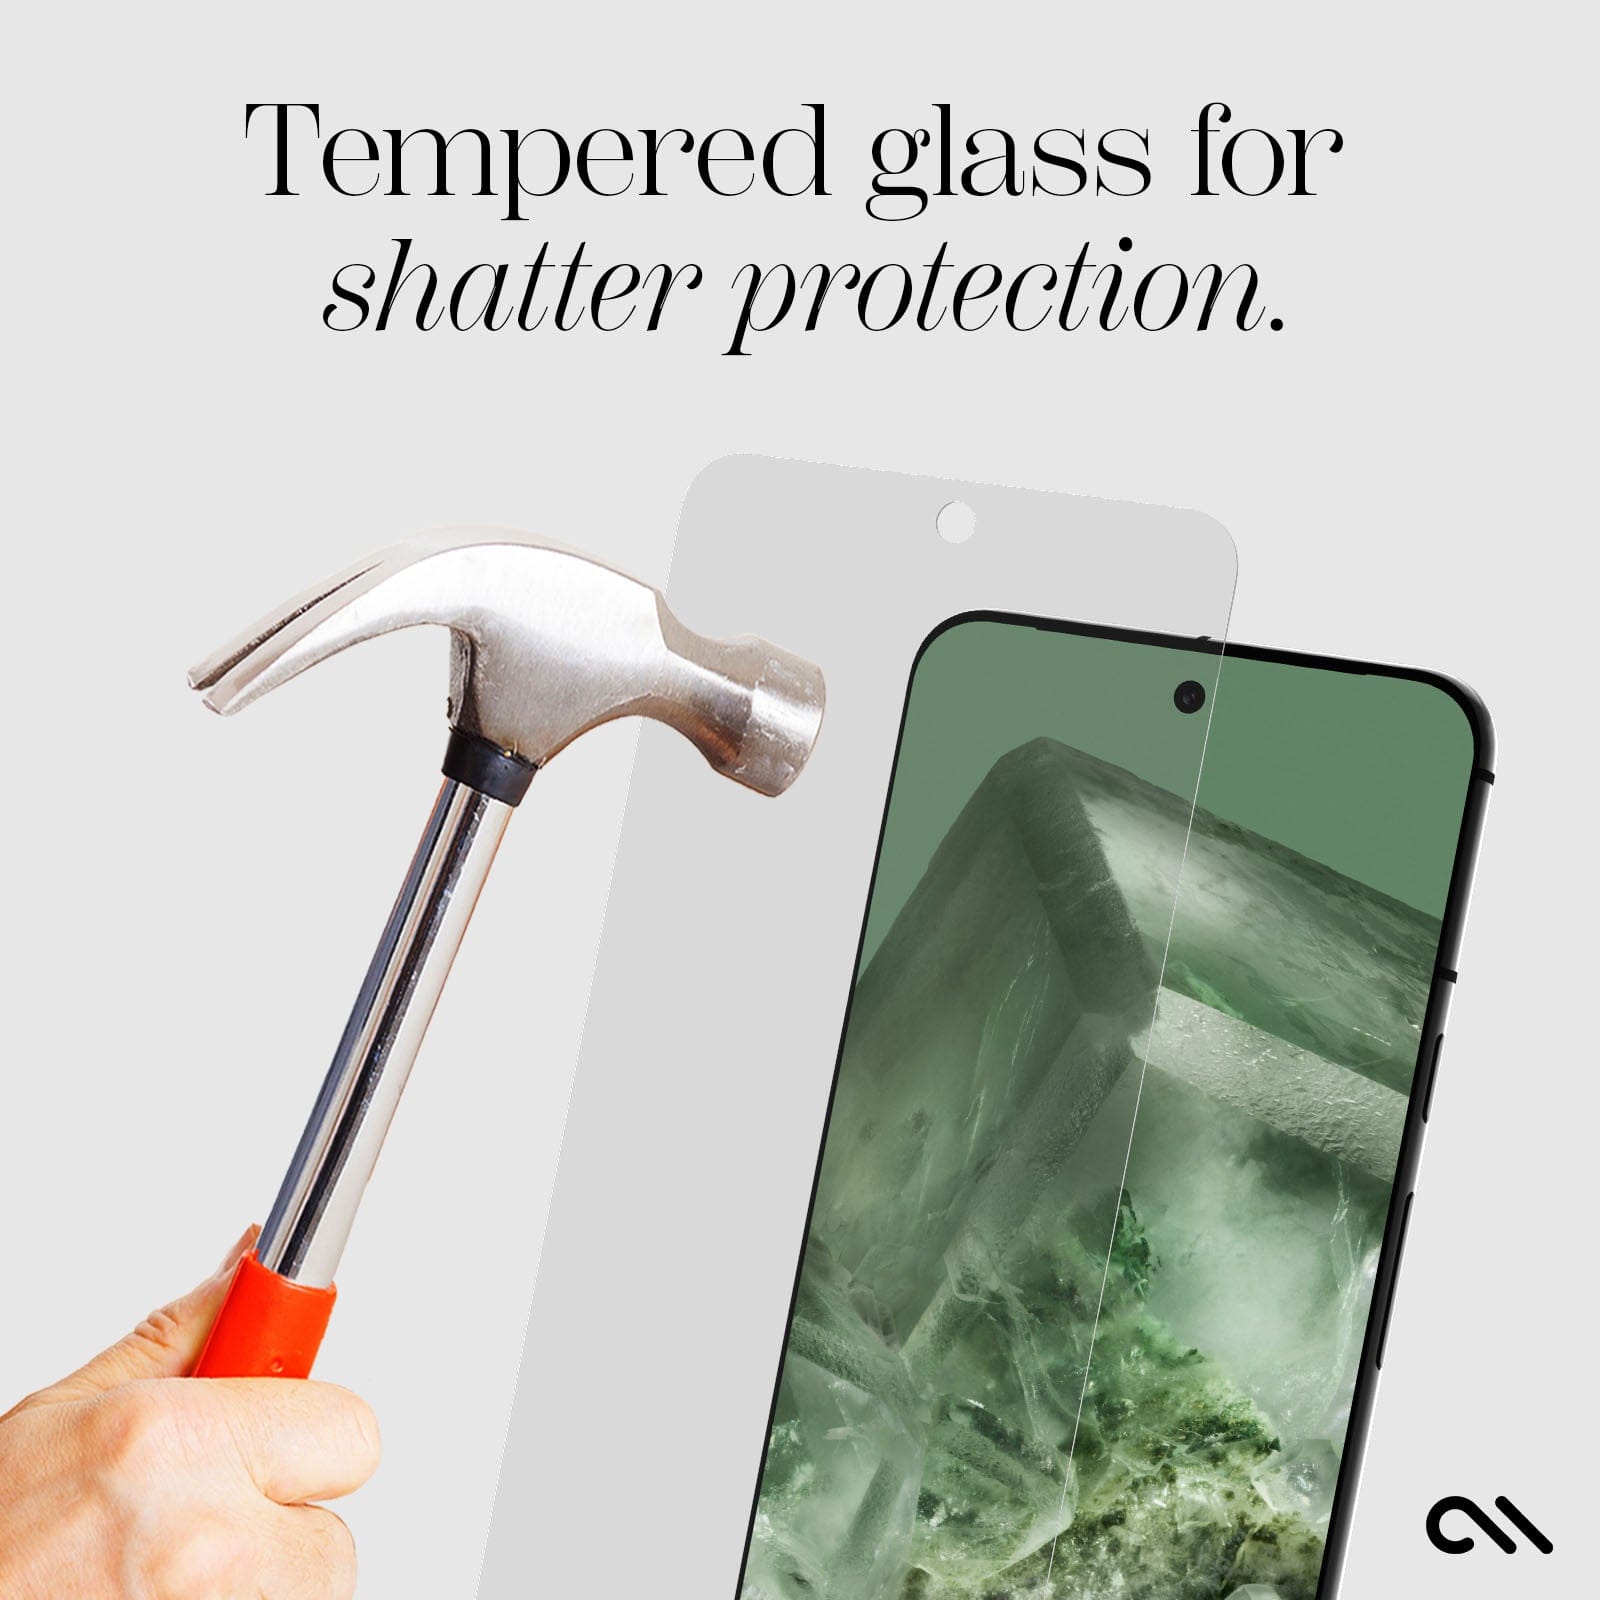 TEMPERED GLASS FOR SHATTER PROTECTION